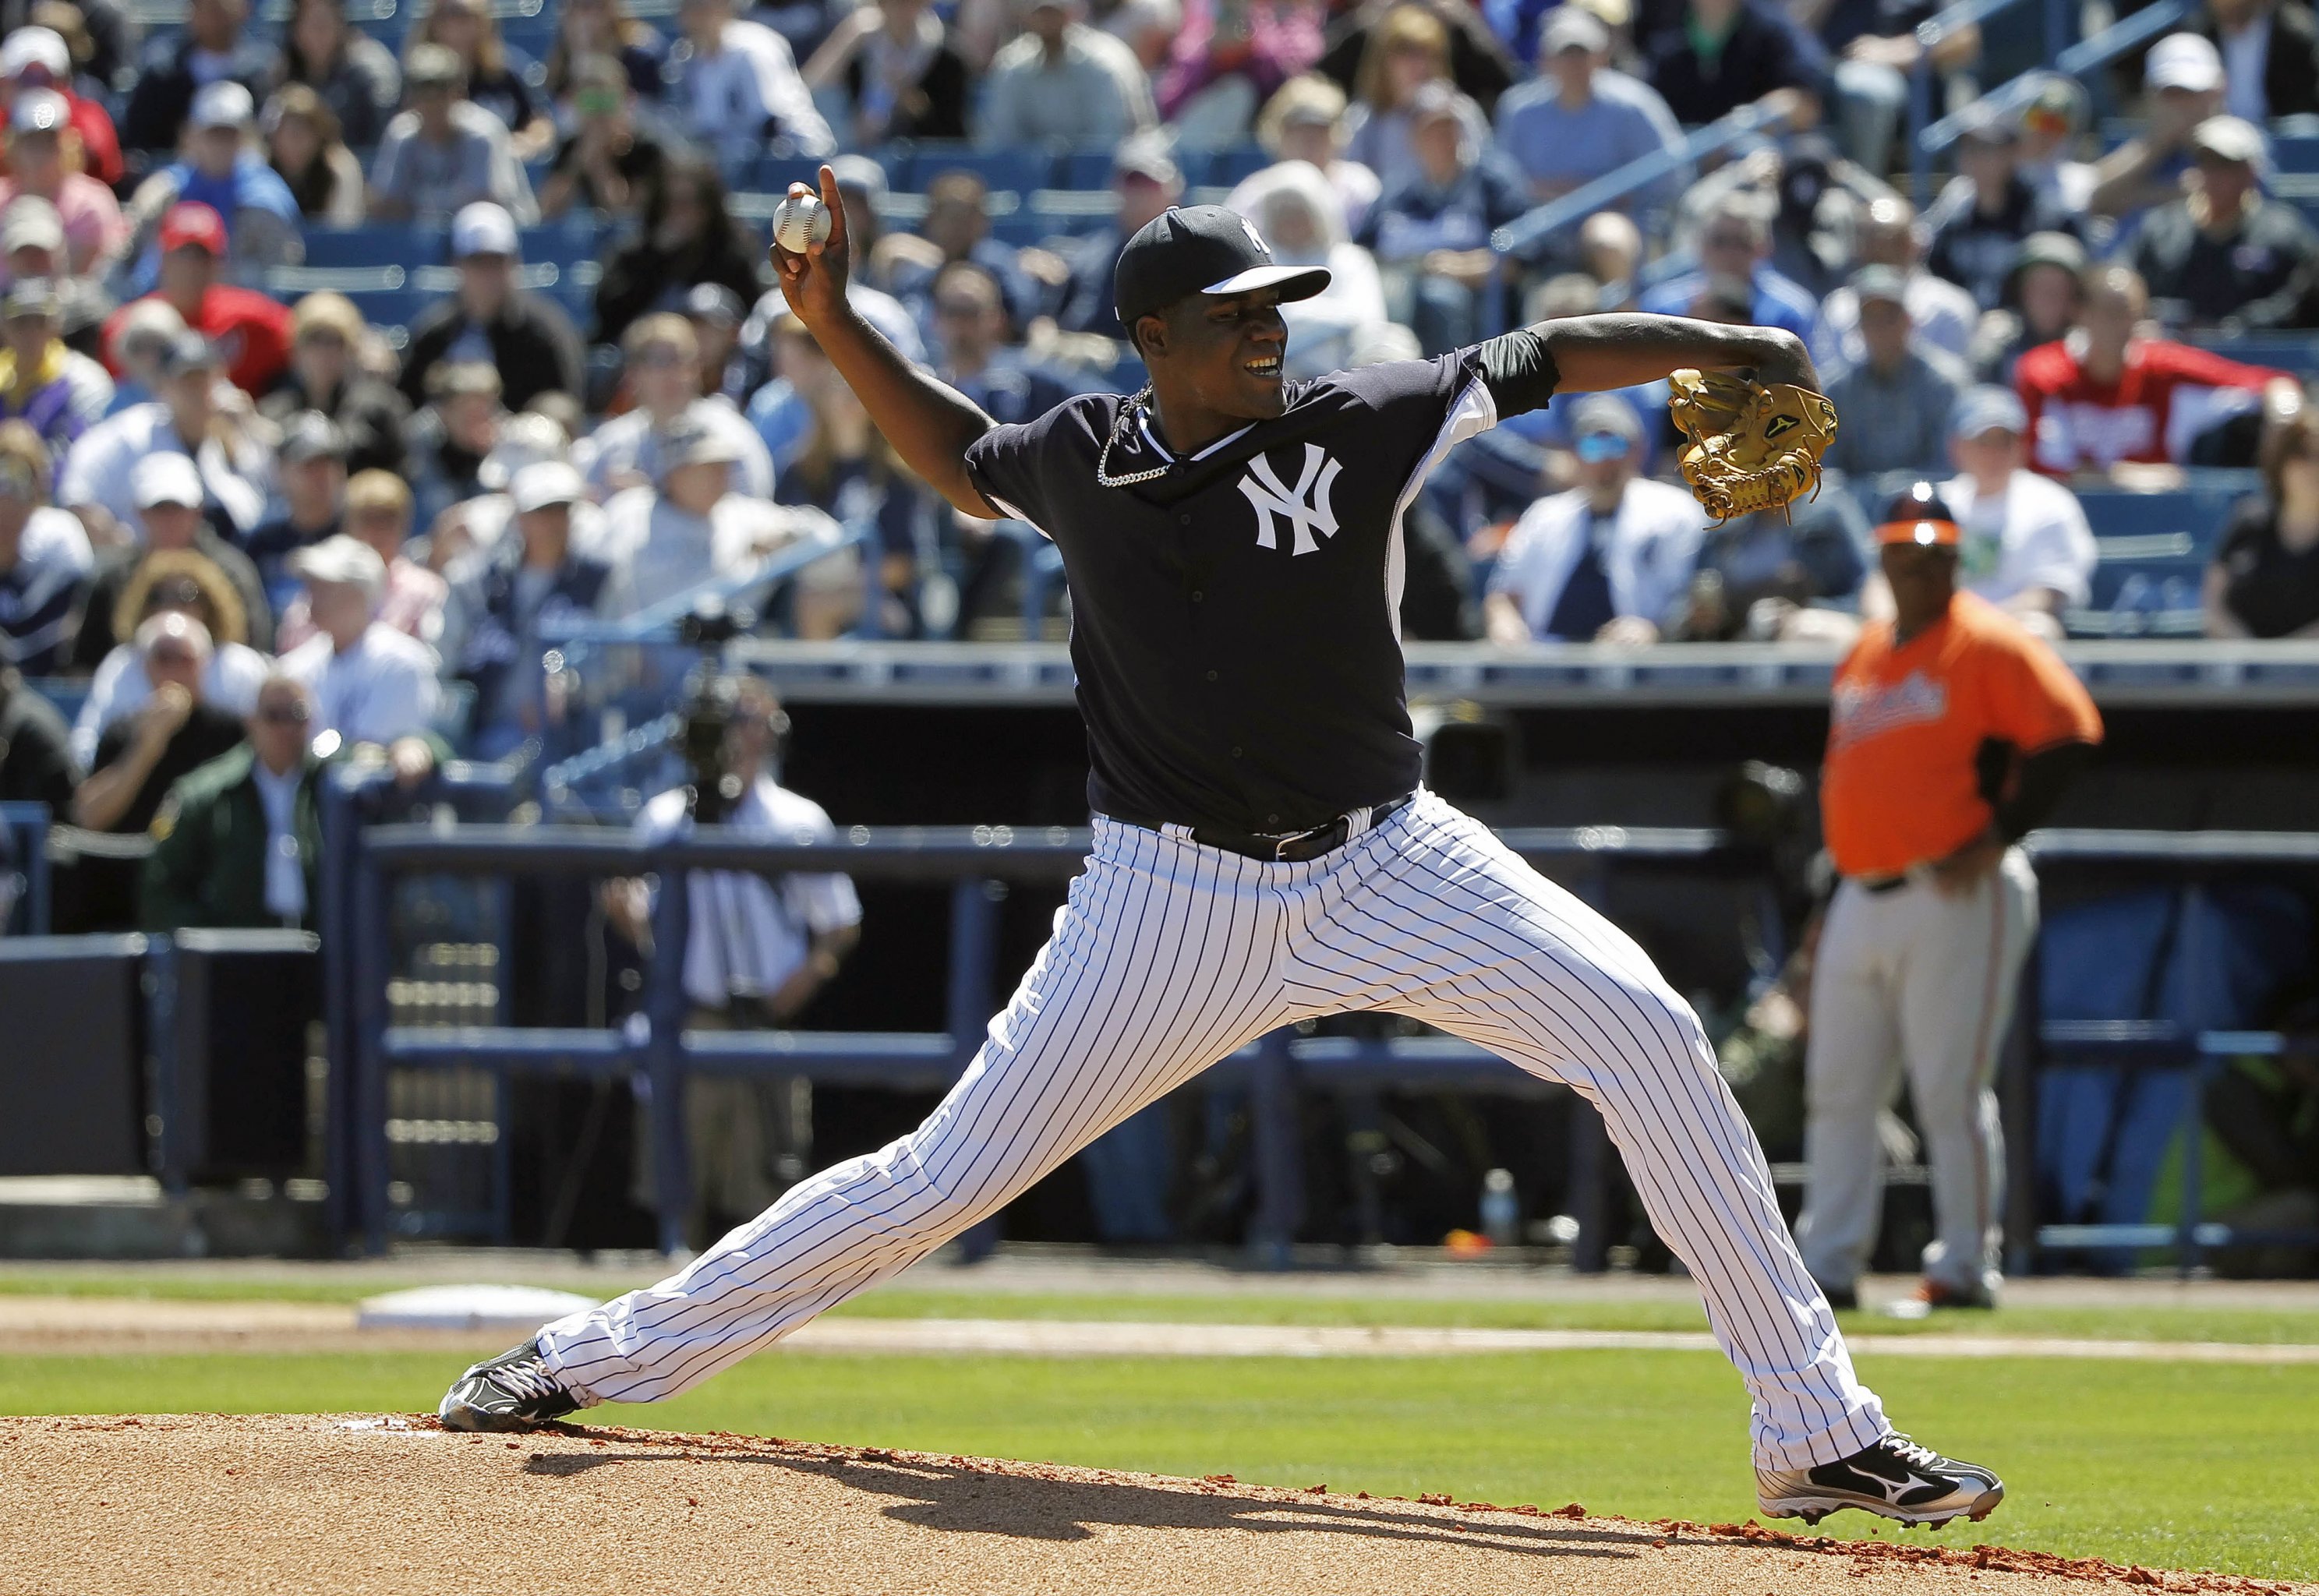 Yankees Spring Training 2014: Daily Updates, Scores, News and Analysis, News, Scores, Highlights, Stats, and Rumors